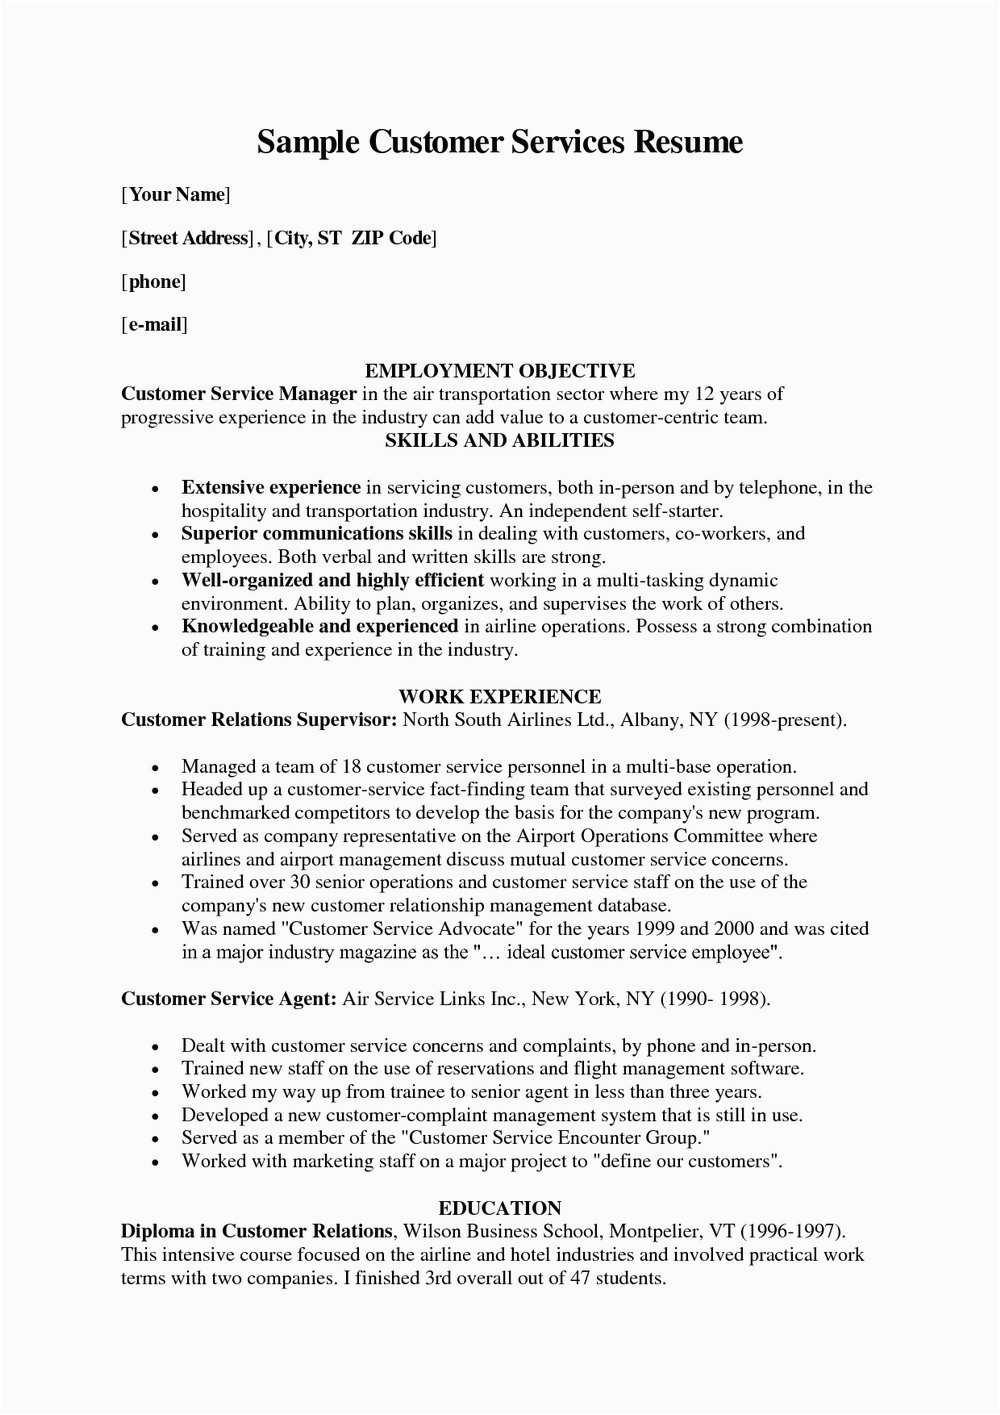 Sample Resume for A Customer Service No Experience Sample Resume for Customer Service Representative No Experience